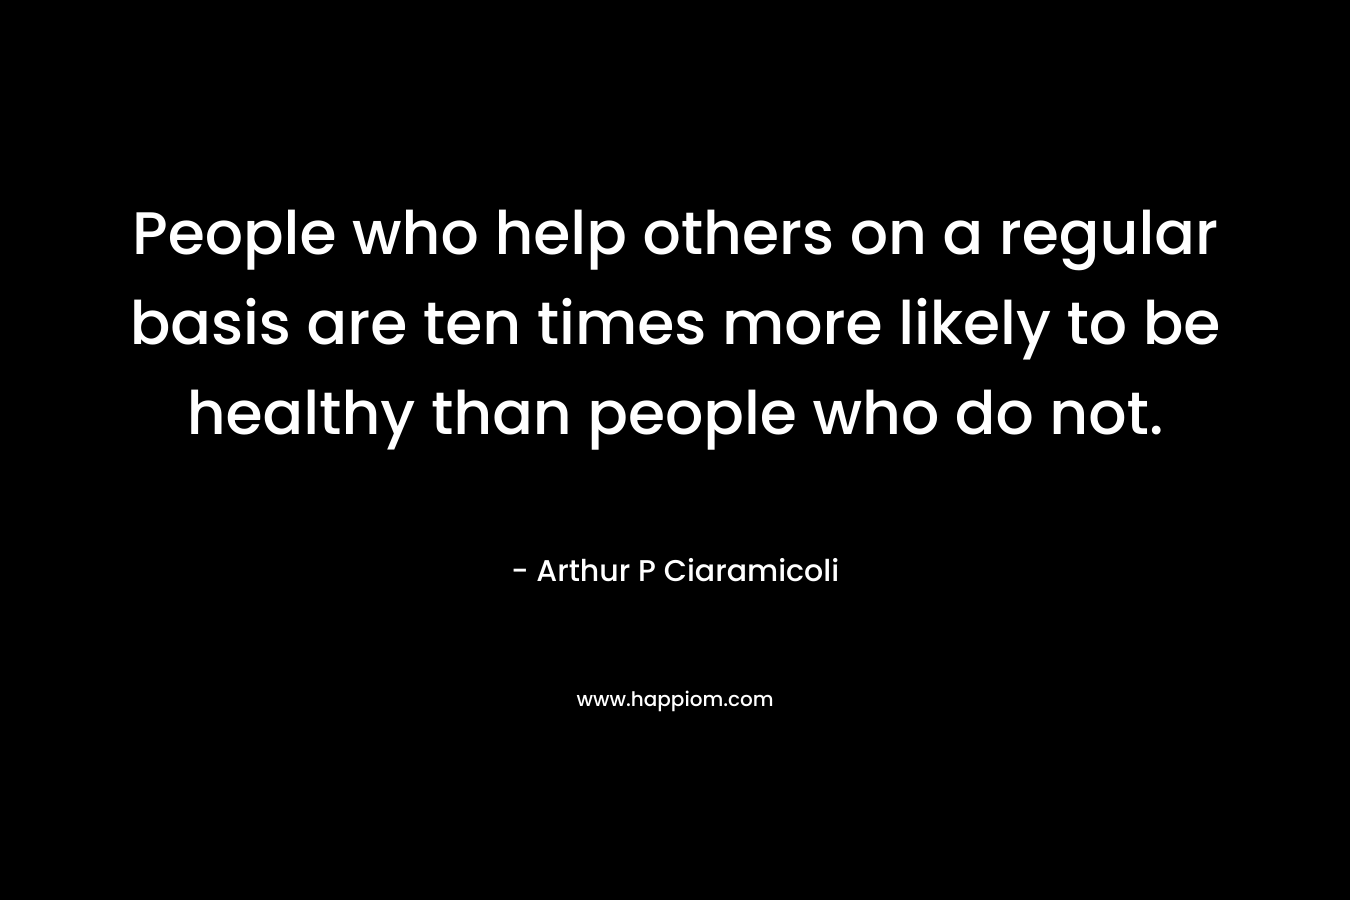 People who help others on a regular basis are ten times more likely to be healthy than people who do not. – Arthur P Ciaramicoli